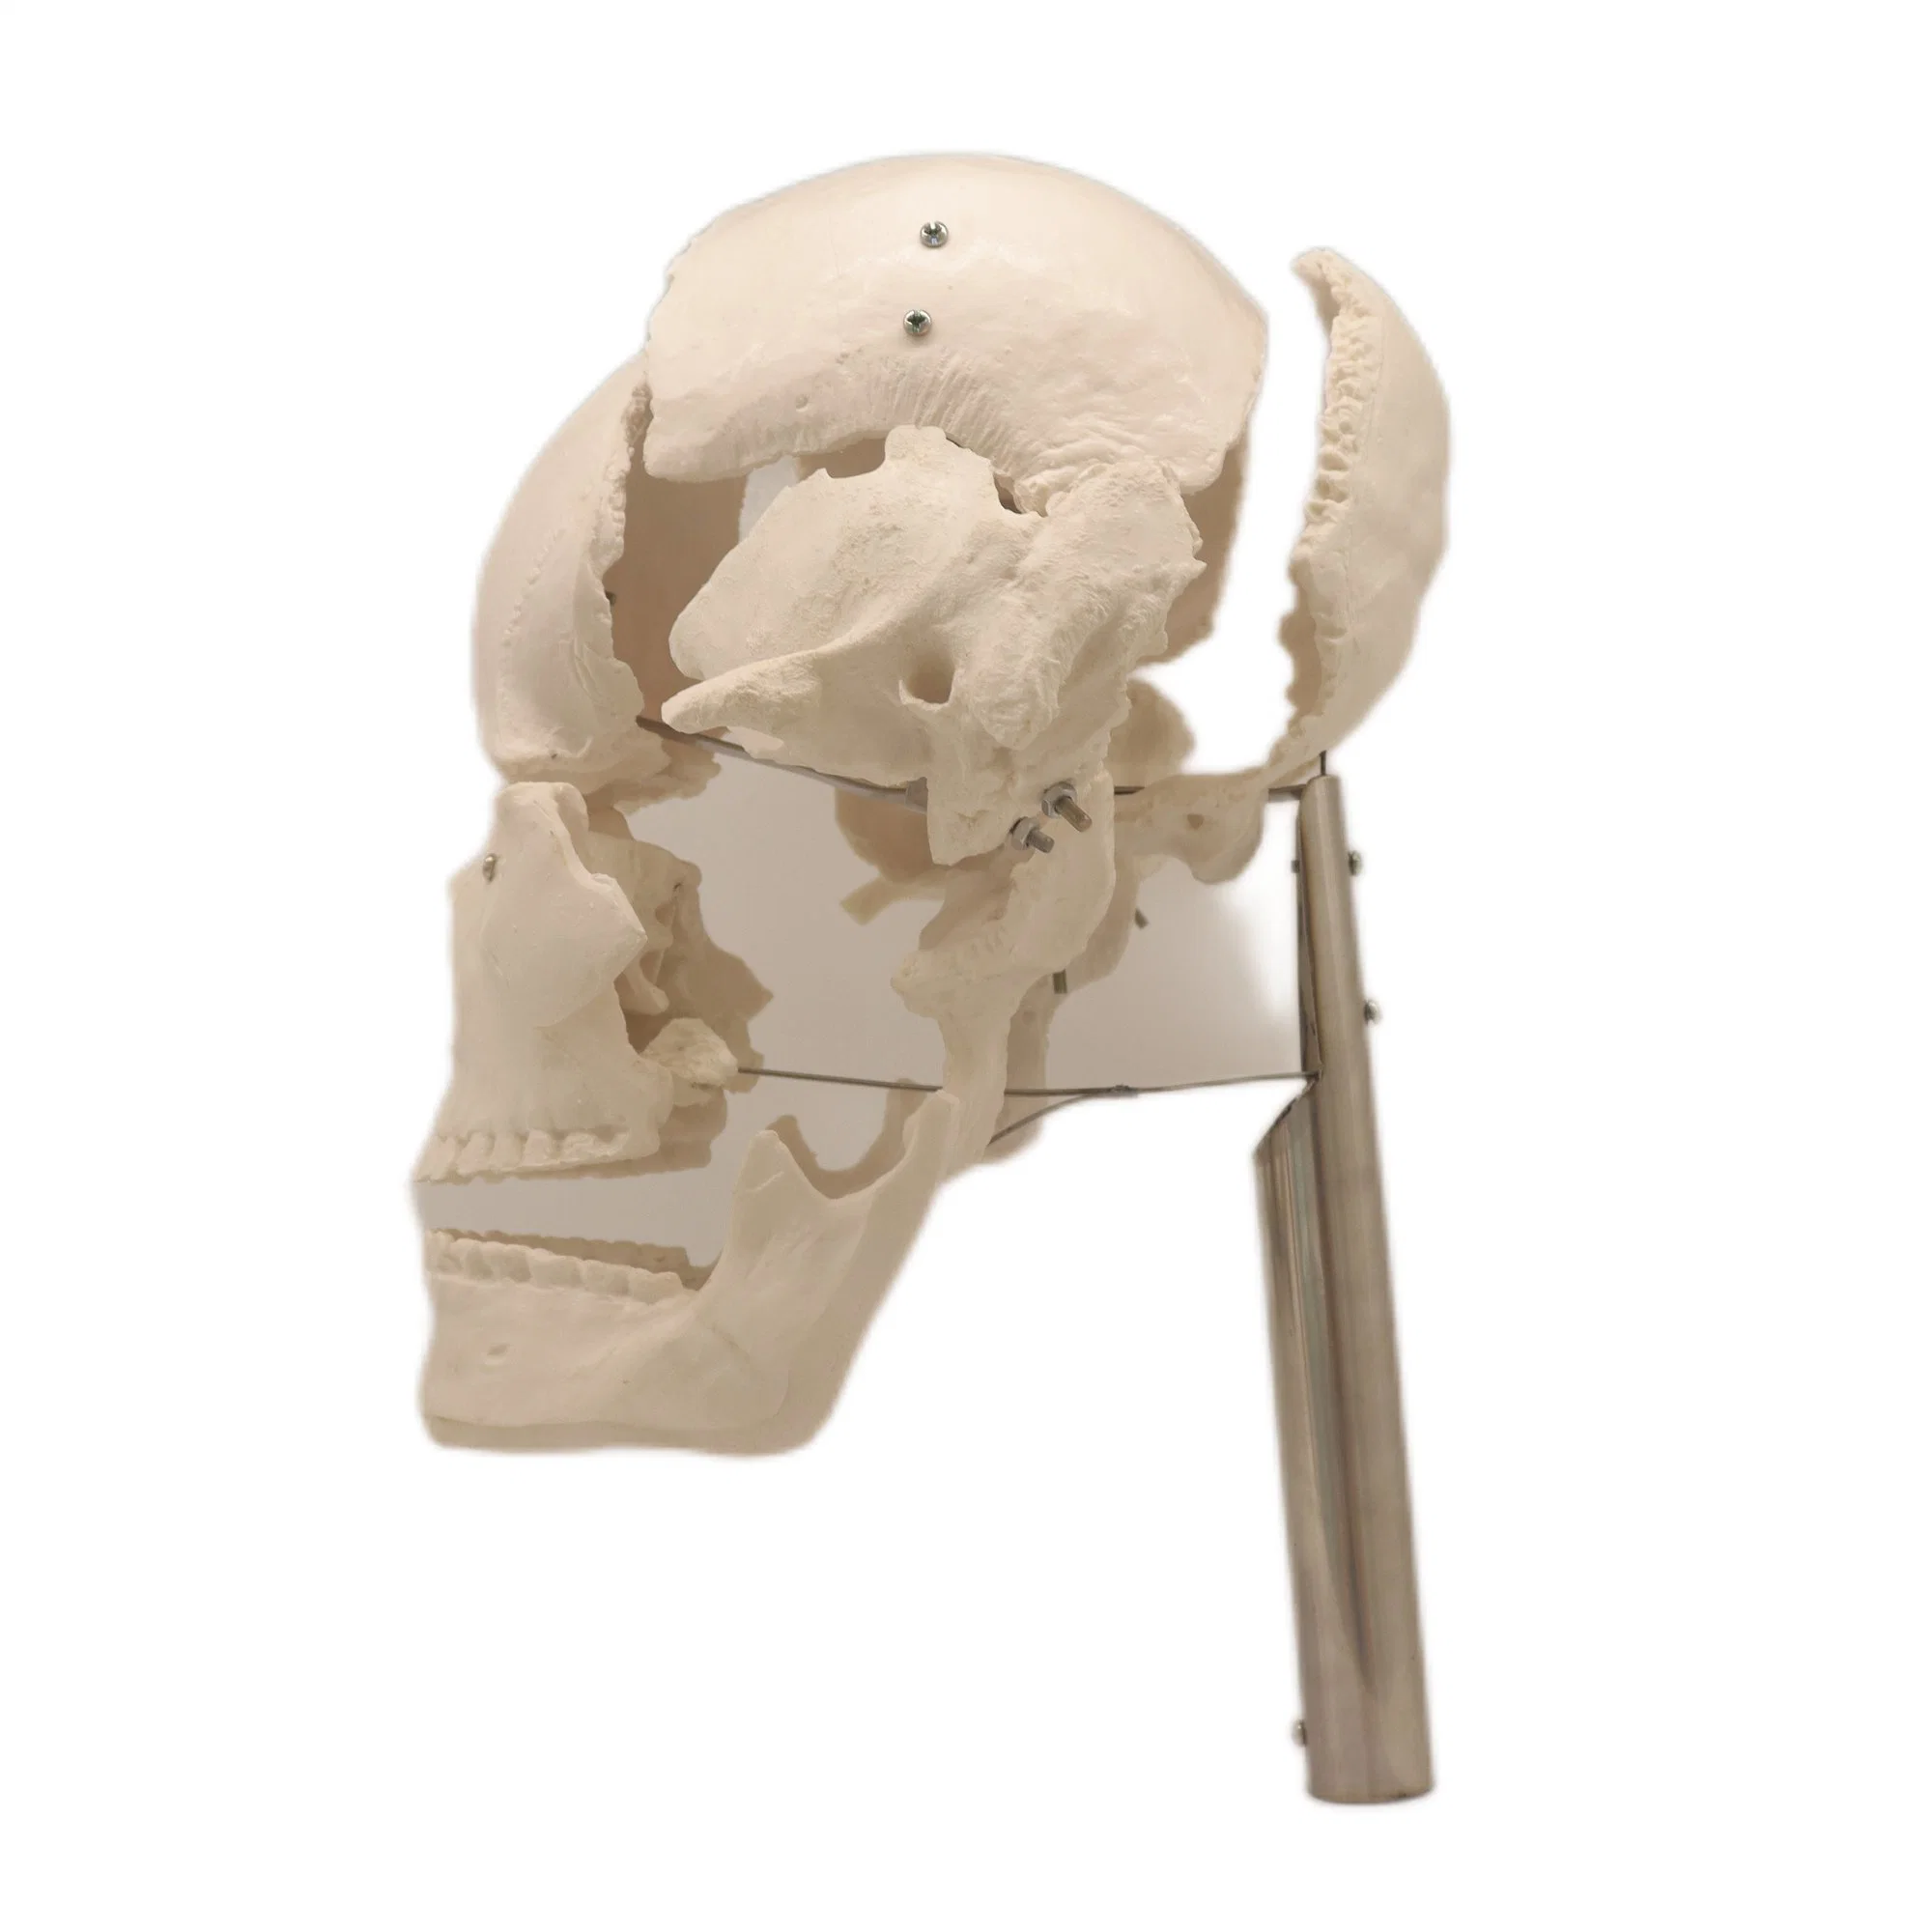 Good Selling Classic Lab Teaching Models The Separated Human Skull Model of PVC